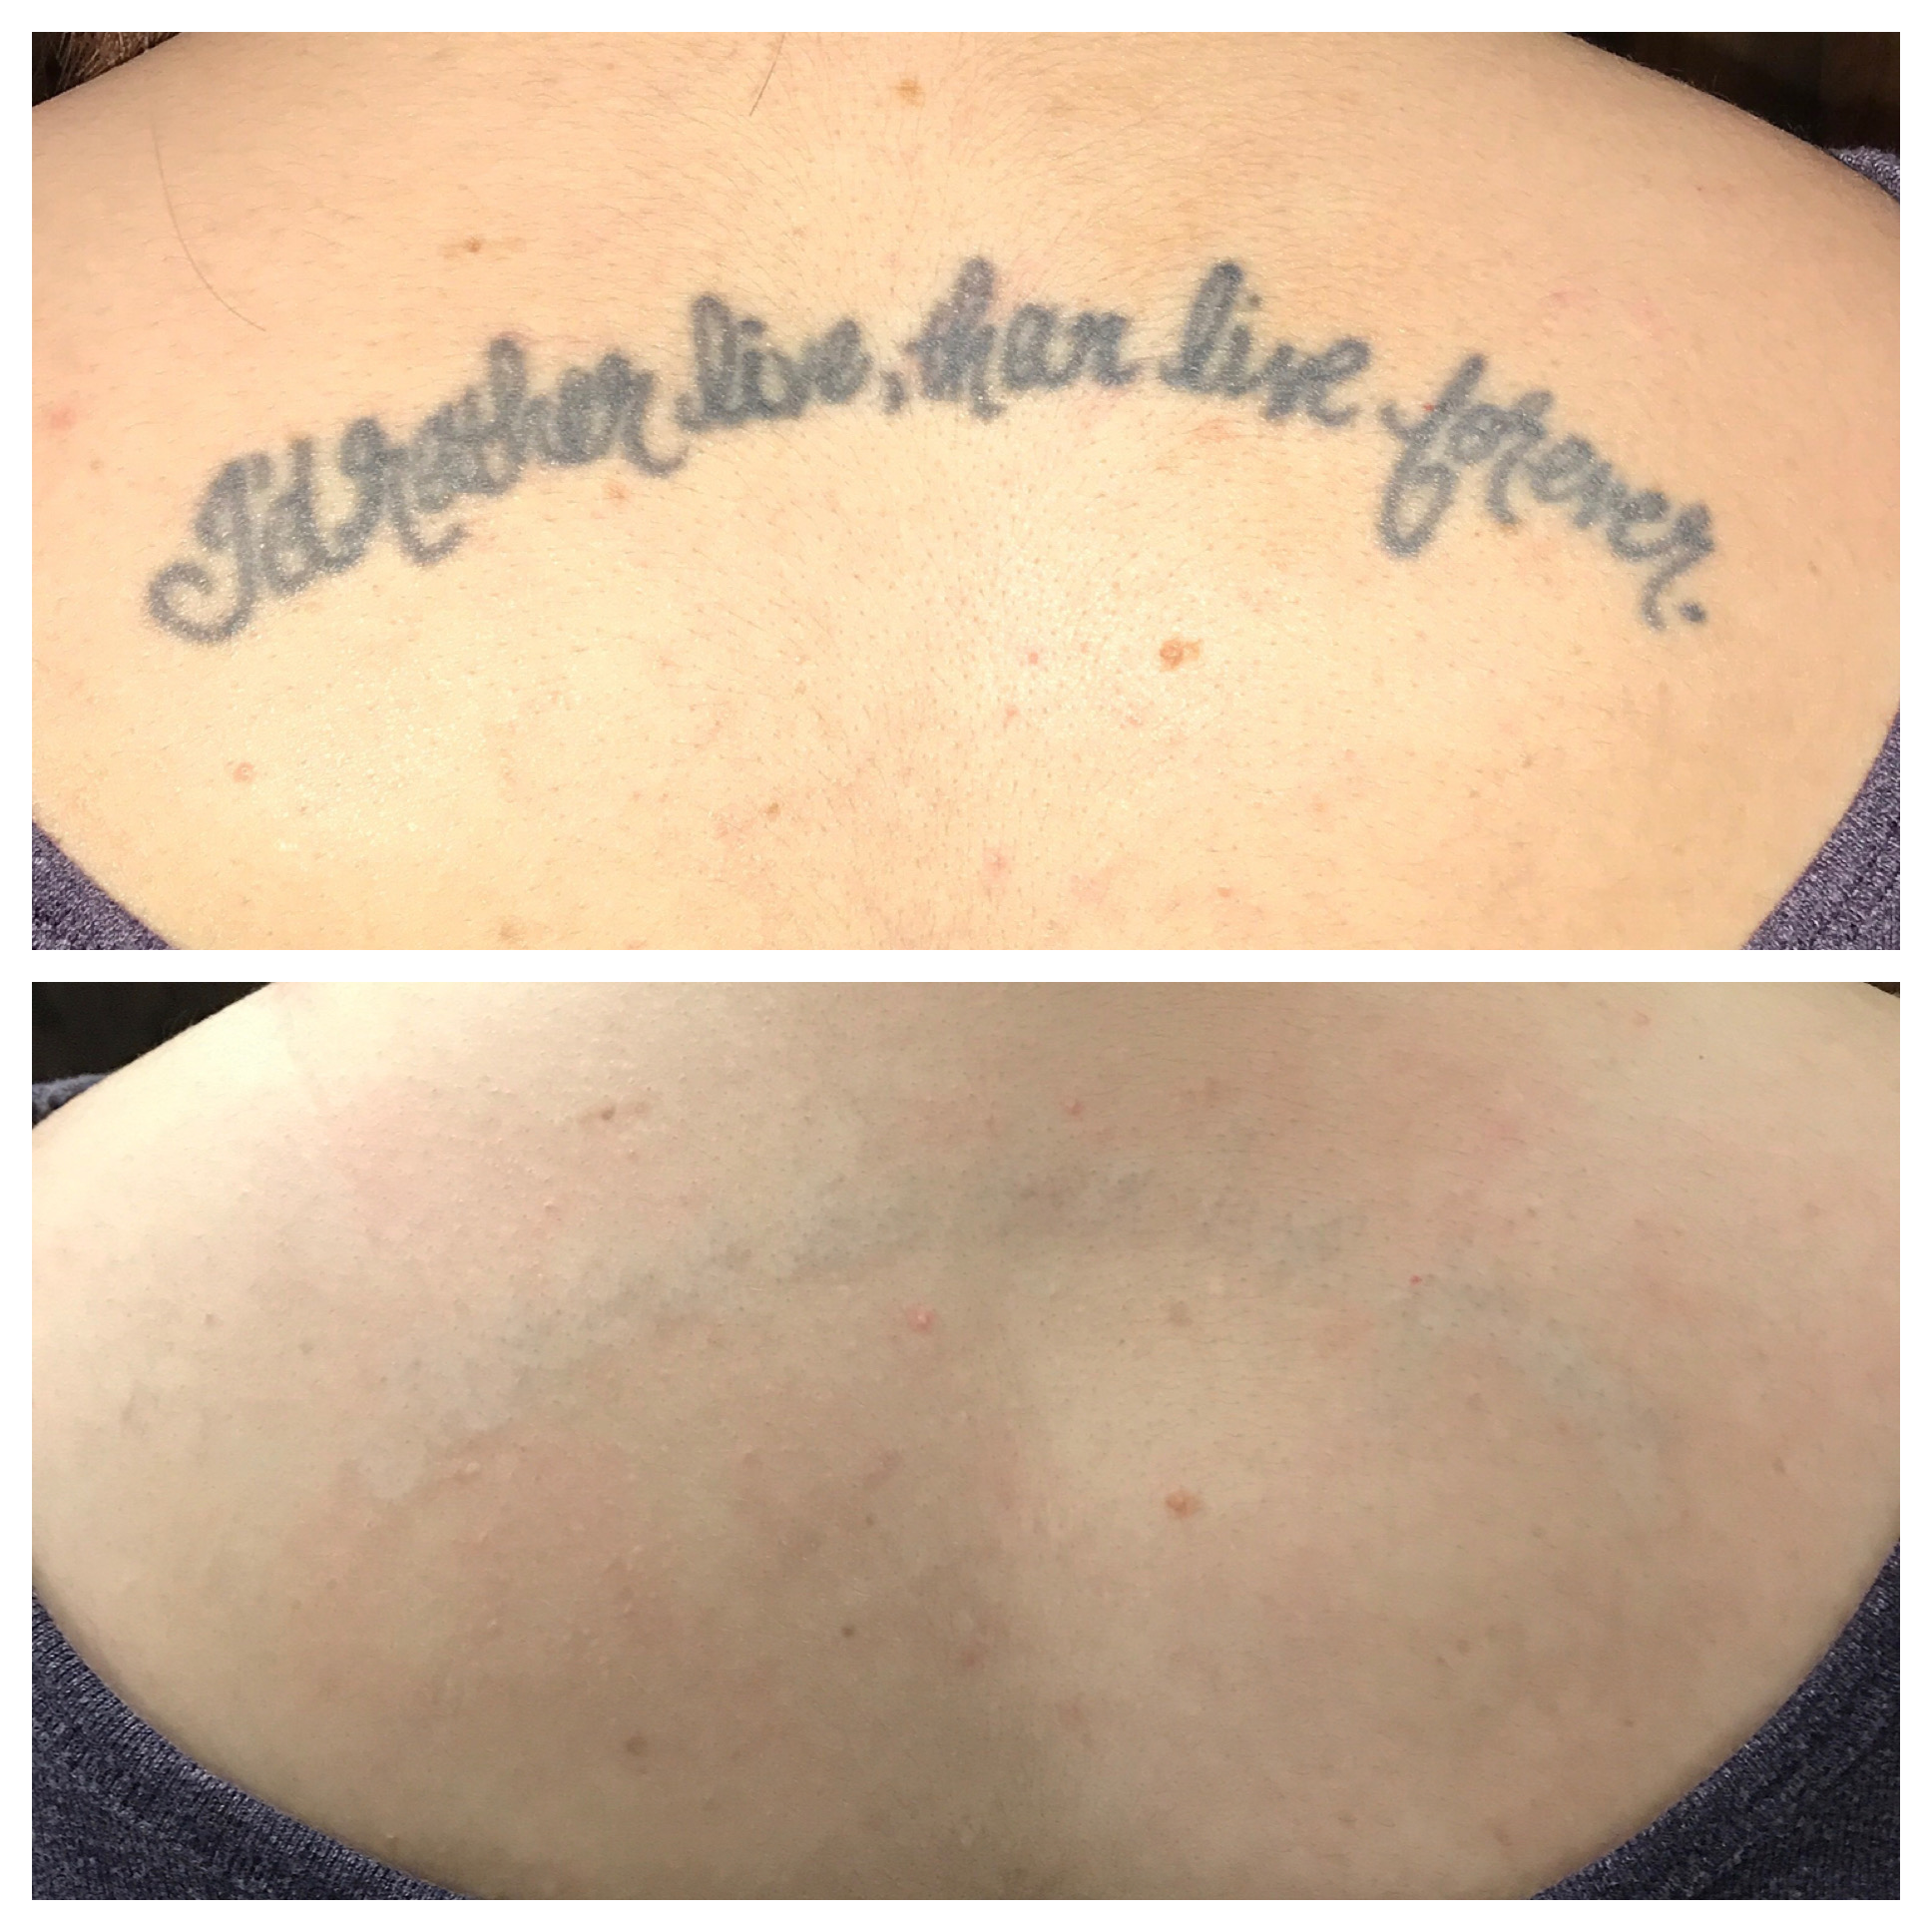 Before and after top and bottom of tattoo removal of one of the worst tattoos ever reading 